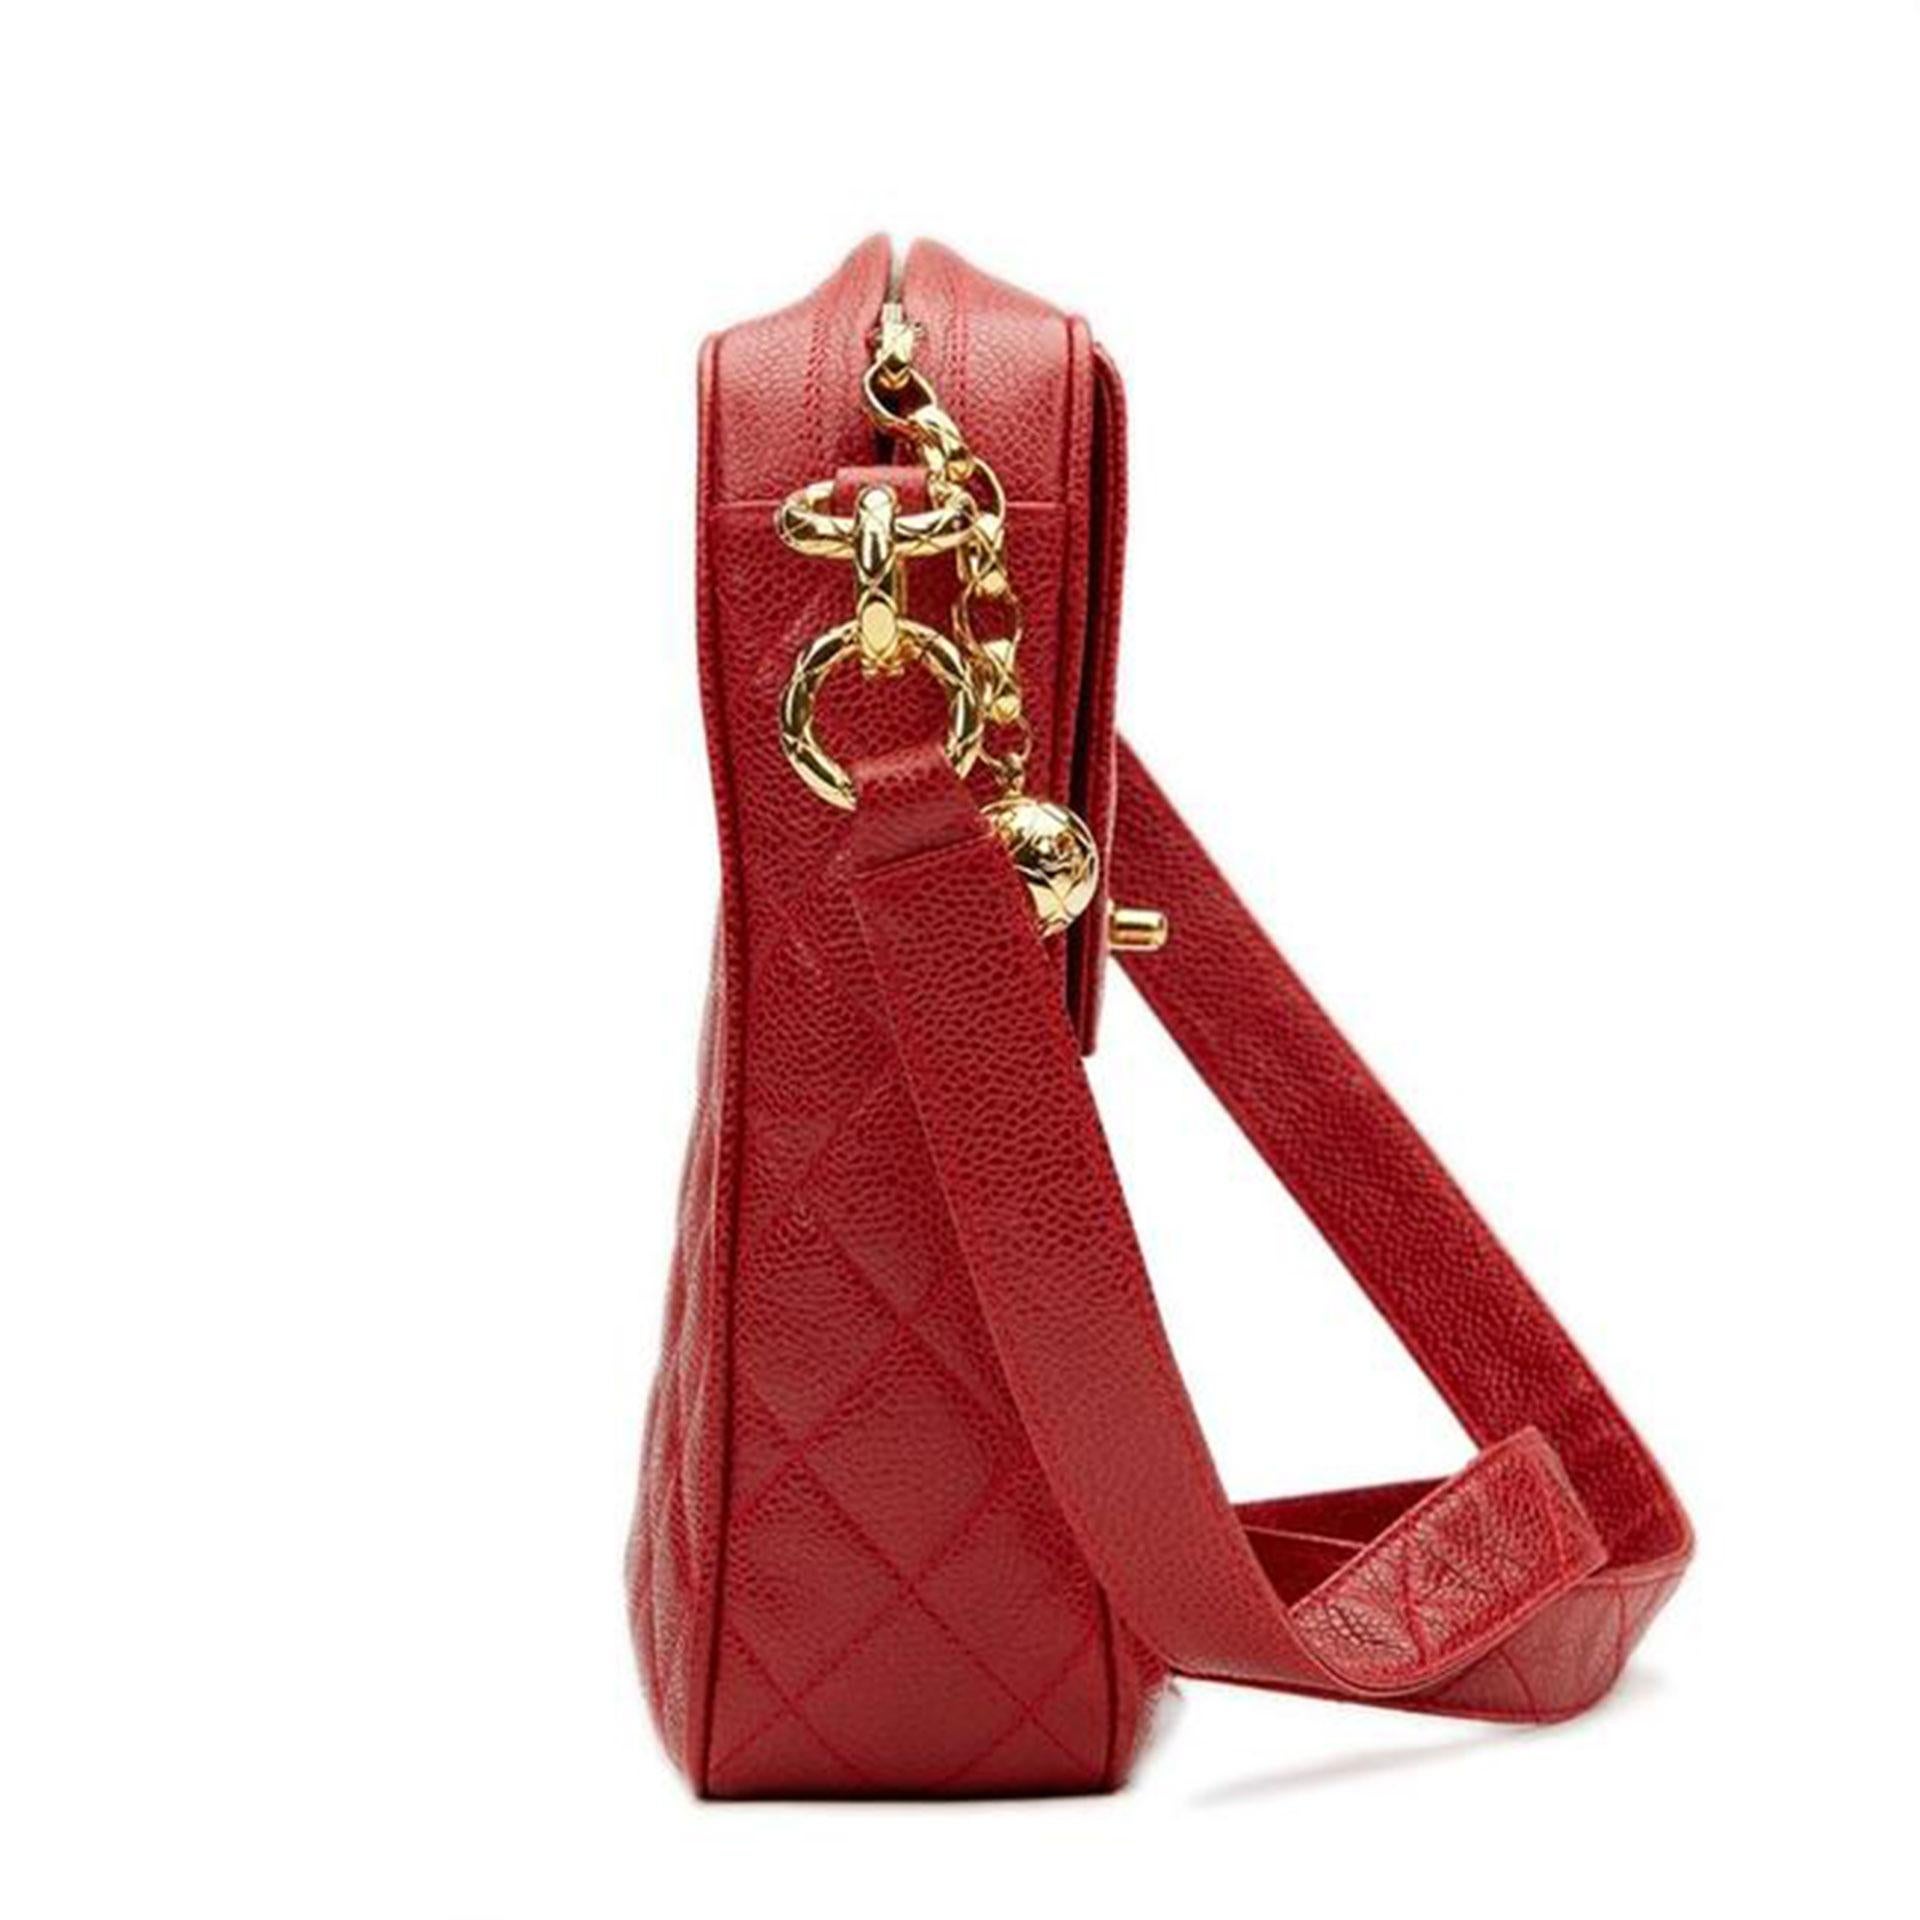 Chanel Classic Flap Vintage with Gold Hardware Red Caviar Leather Cross Body Bag For Sale 4